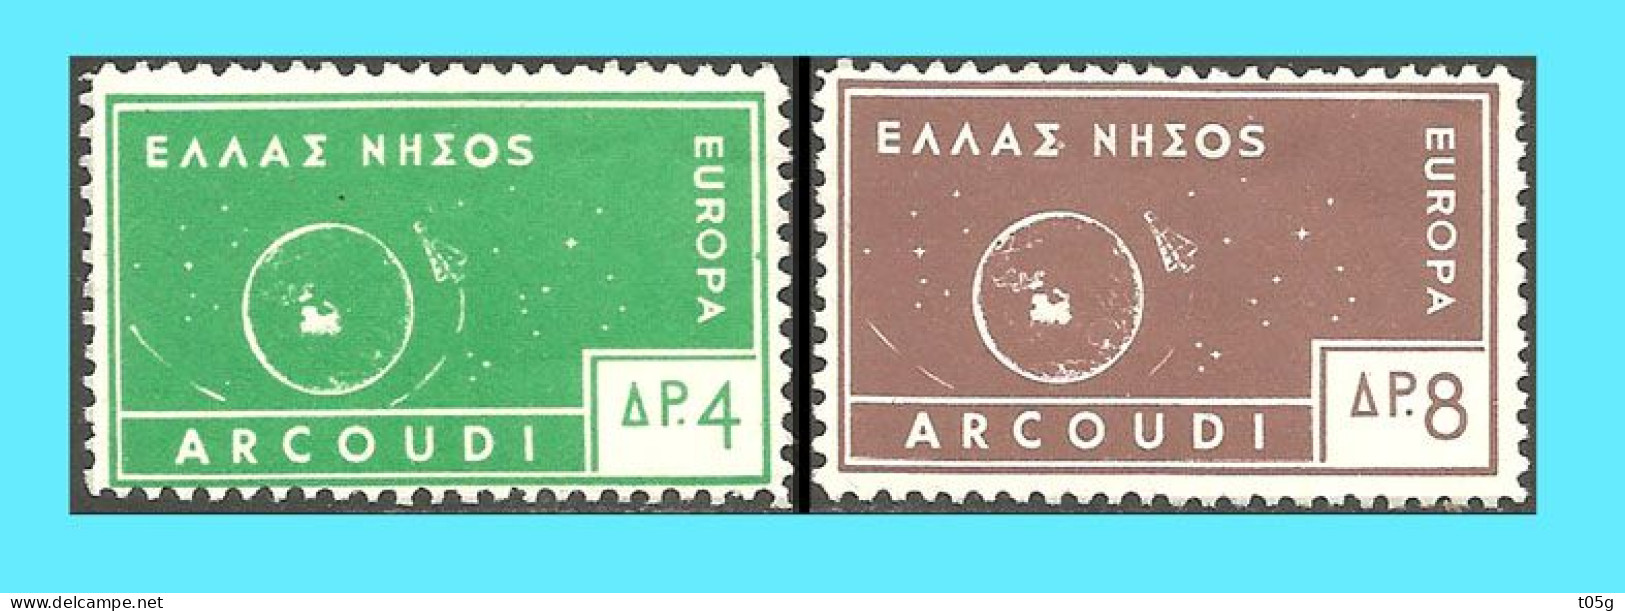 GREECE-GRECE-HELLAS - ITALY- IONIAN  ARCOUDI ISLAND -EUROPA 1963: Unofficial -private Issue - Compl. Set  MNH** - Ungebraucht